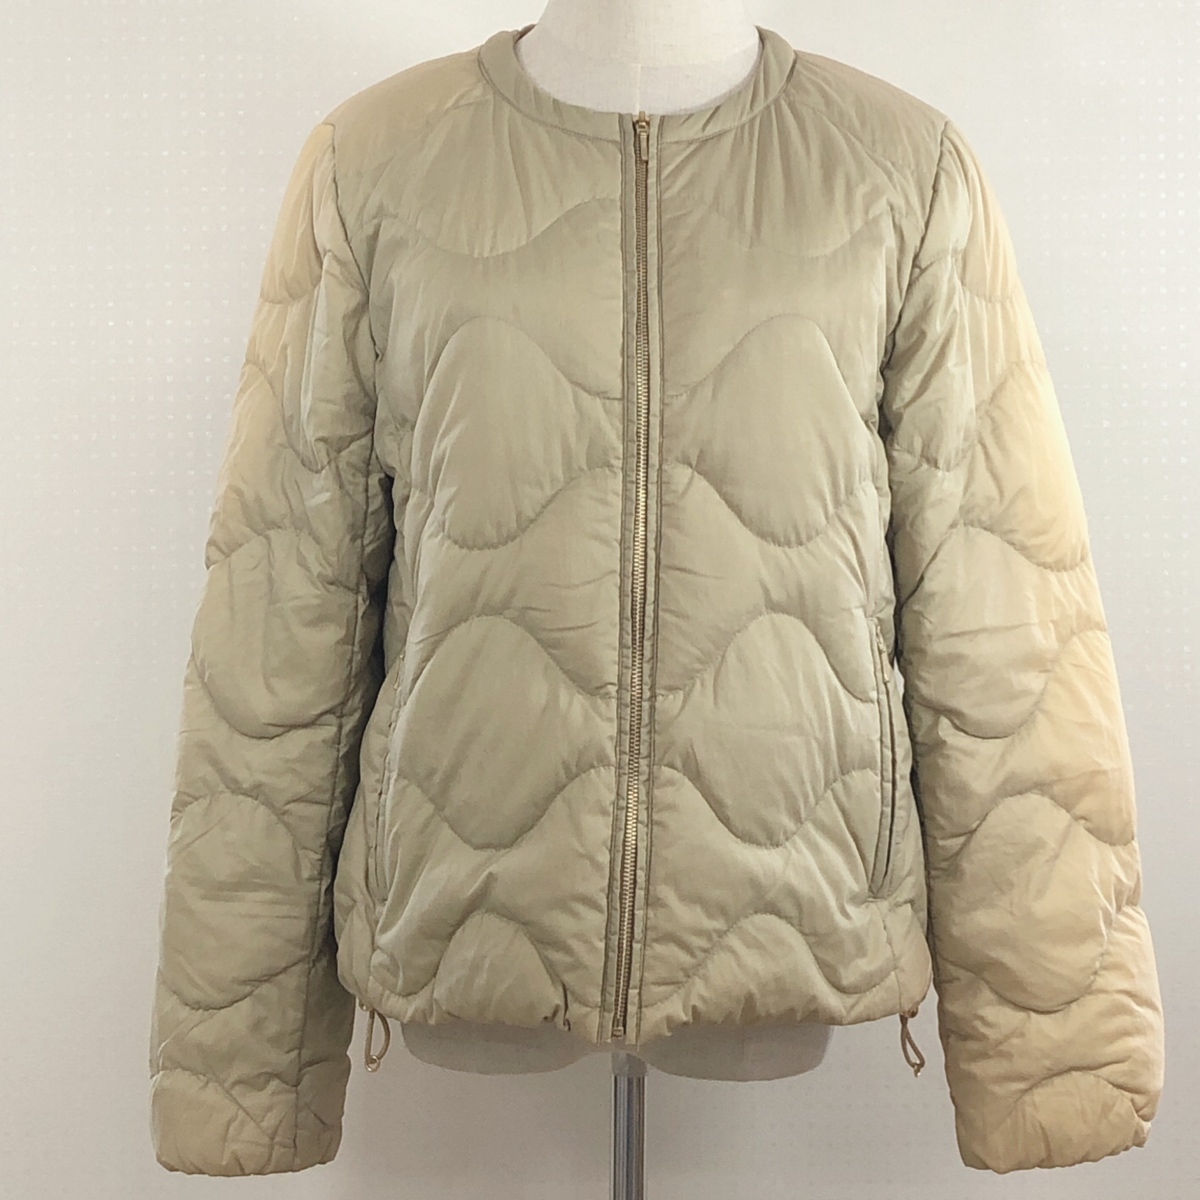 Y0203 Leilian Leilian lady's outer down jacket quilting jacket long sleeve 9 number M size beige down feather autumn winter 